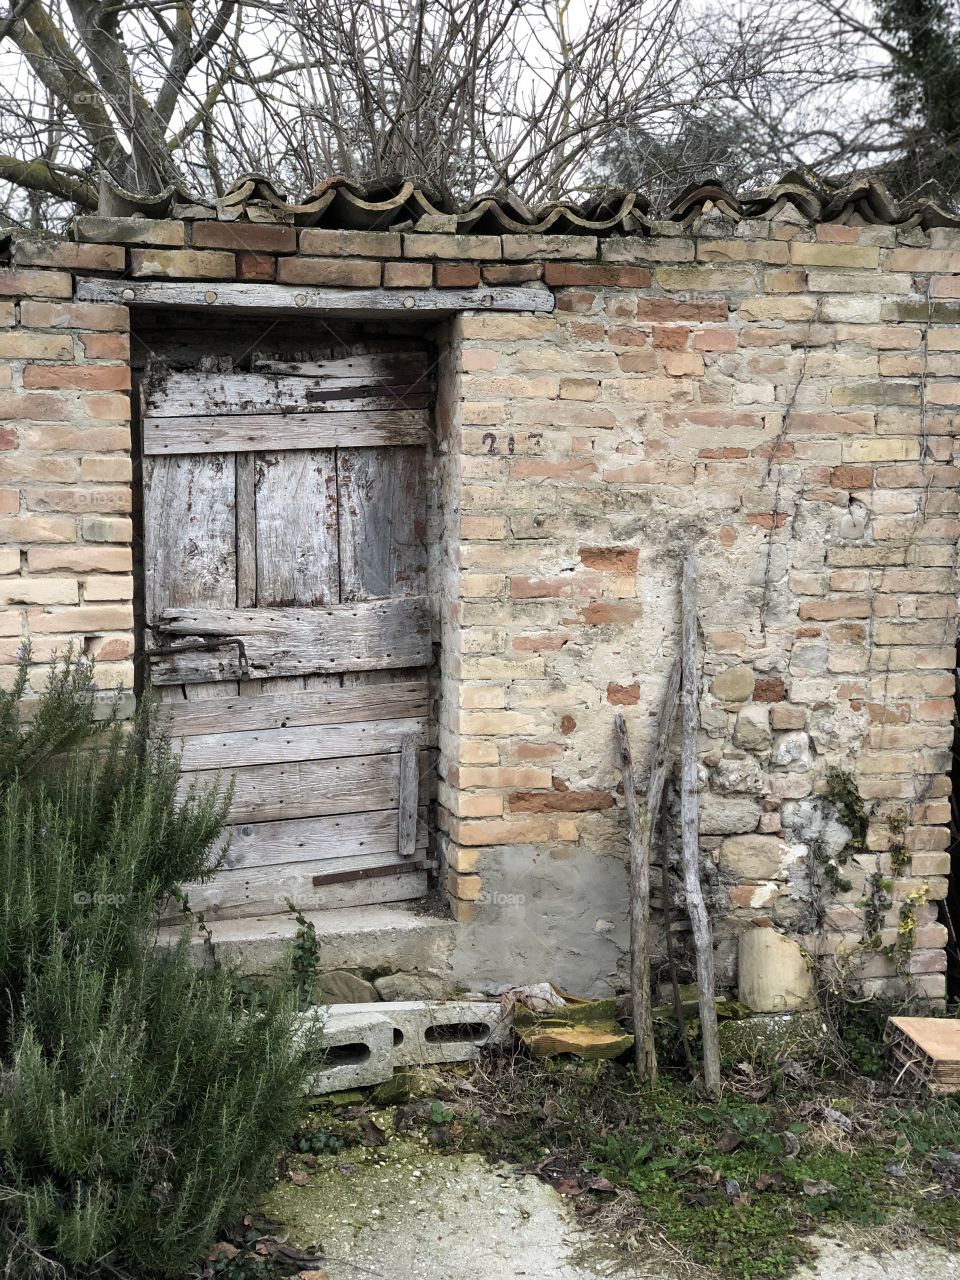 Abandoned hen-house with a rosemary plant front of the door, Marche region, Italy